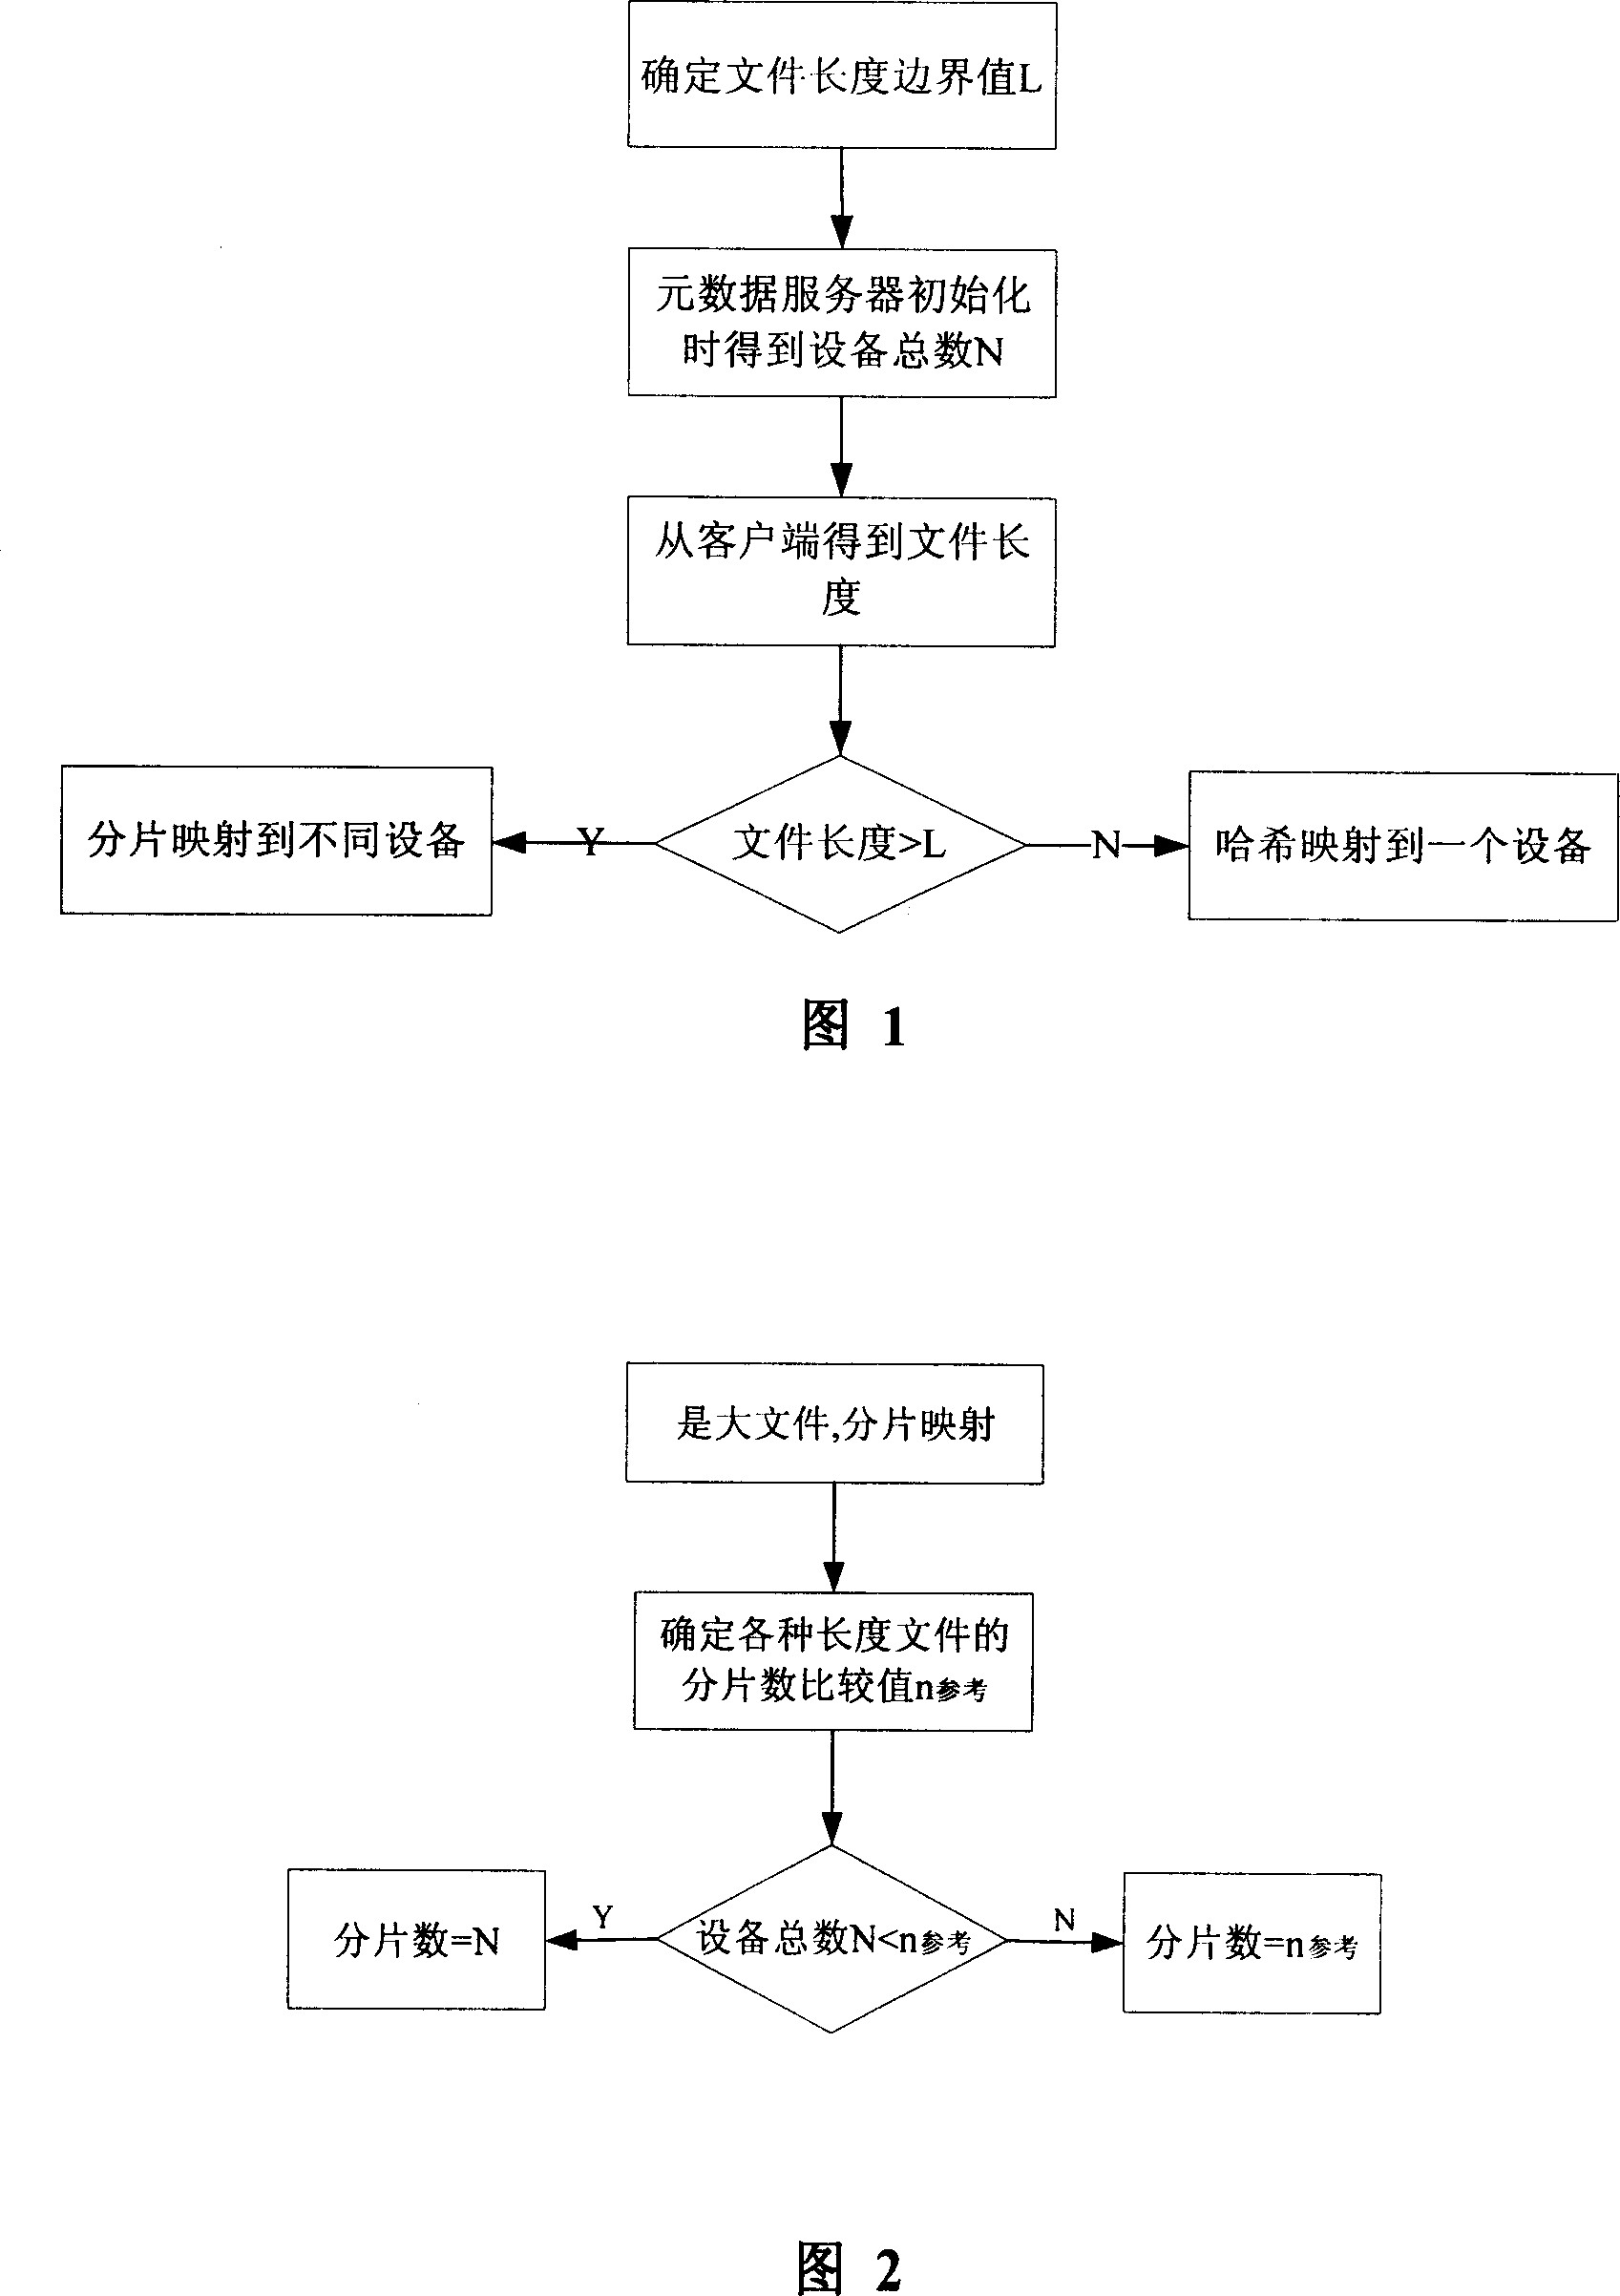 Distributing method of object faced to object storage system